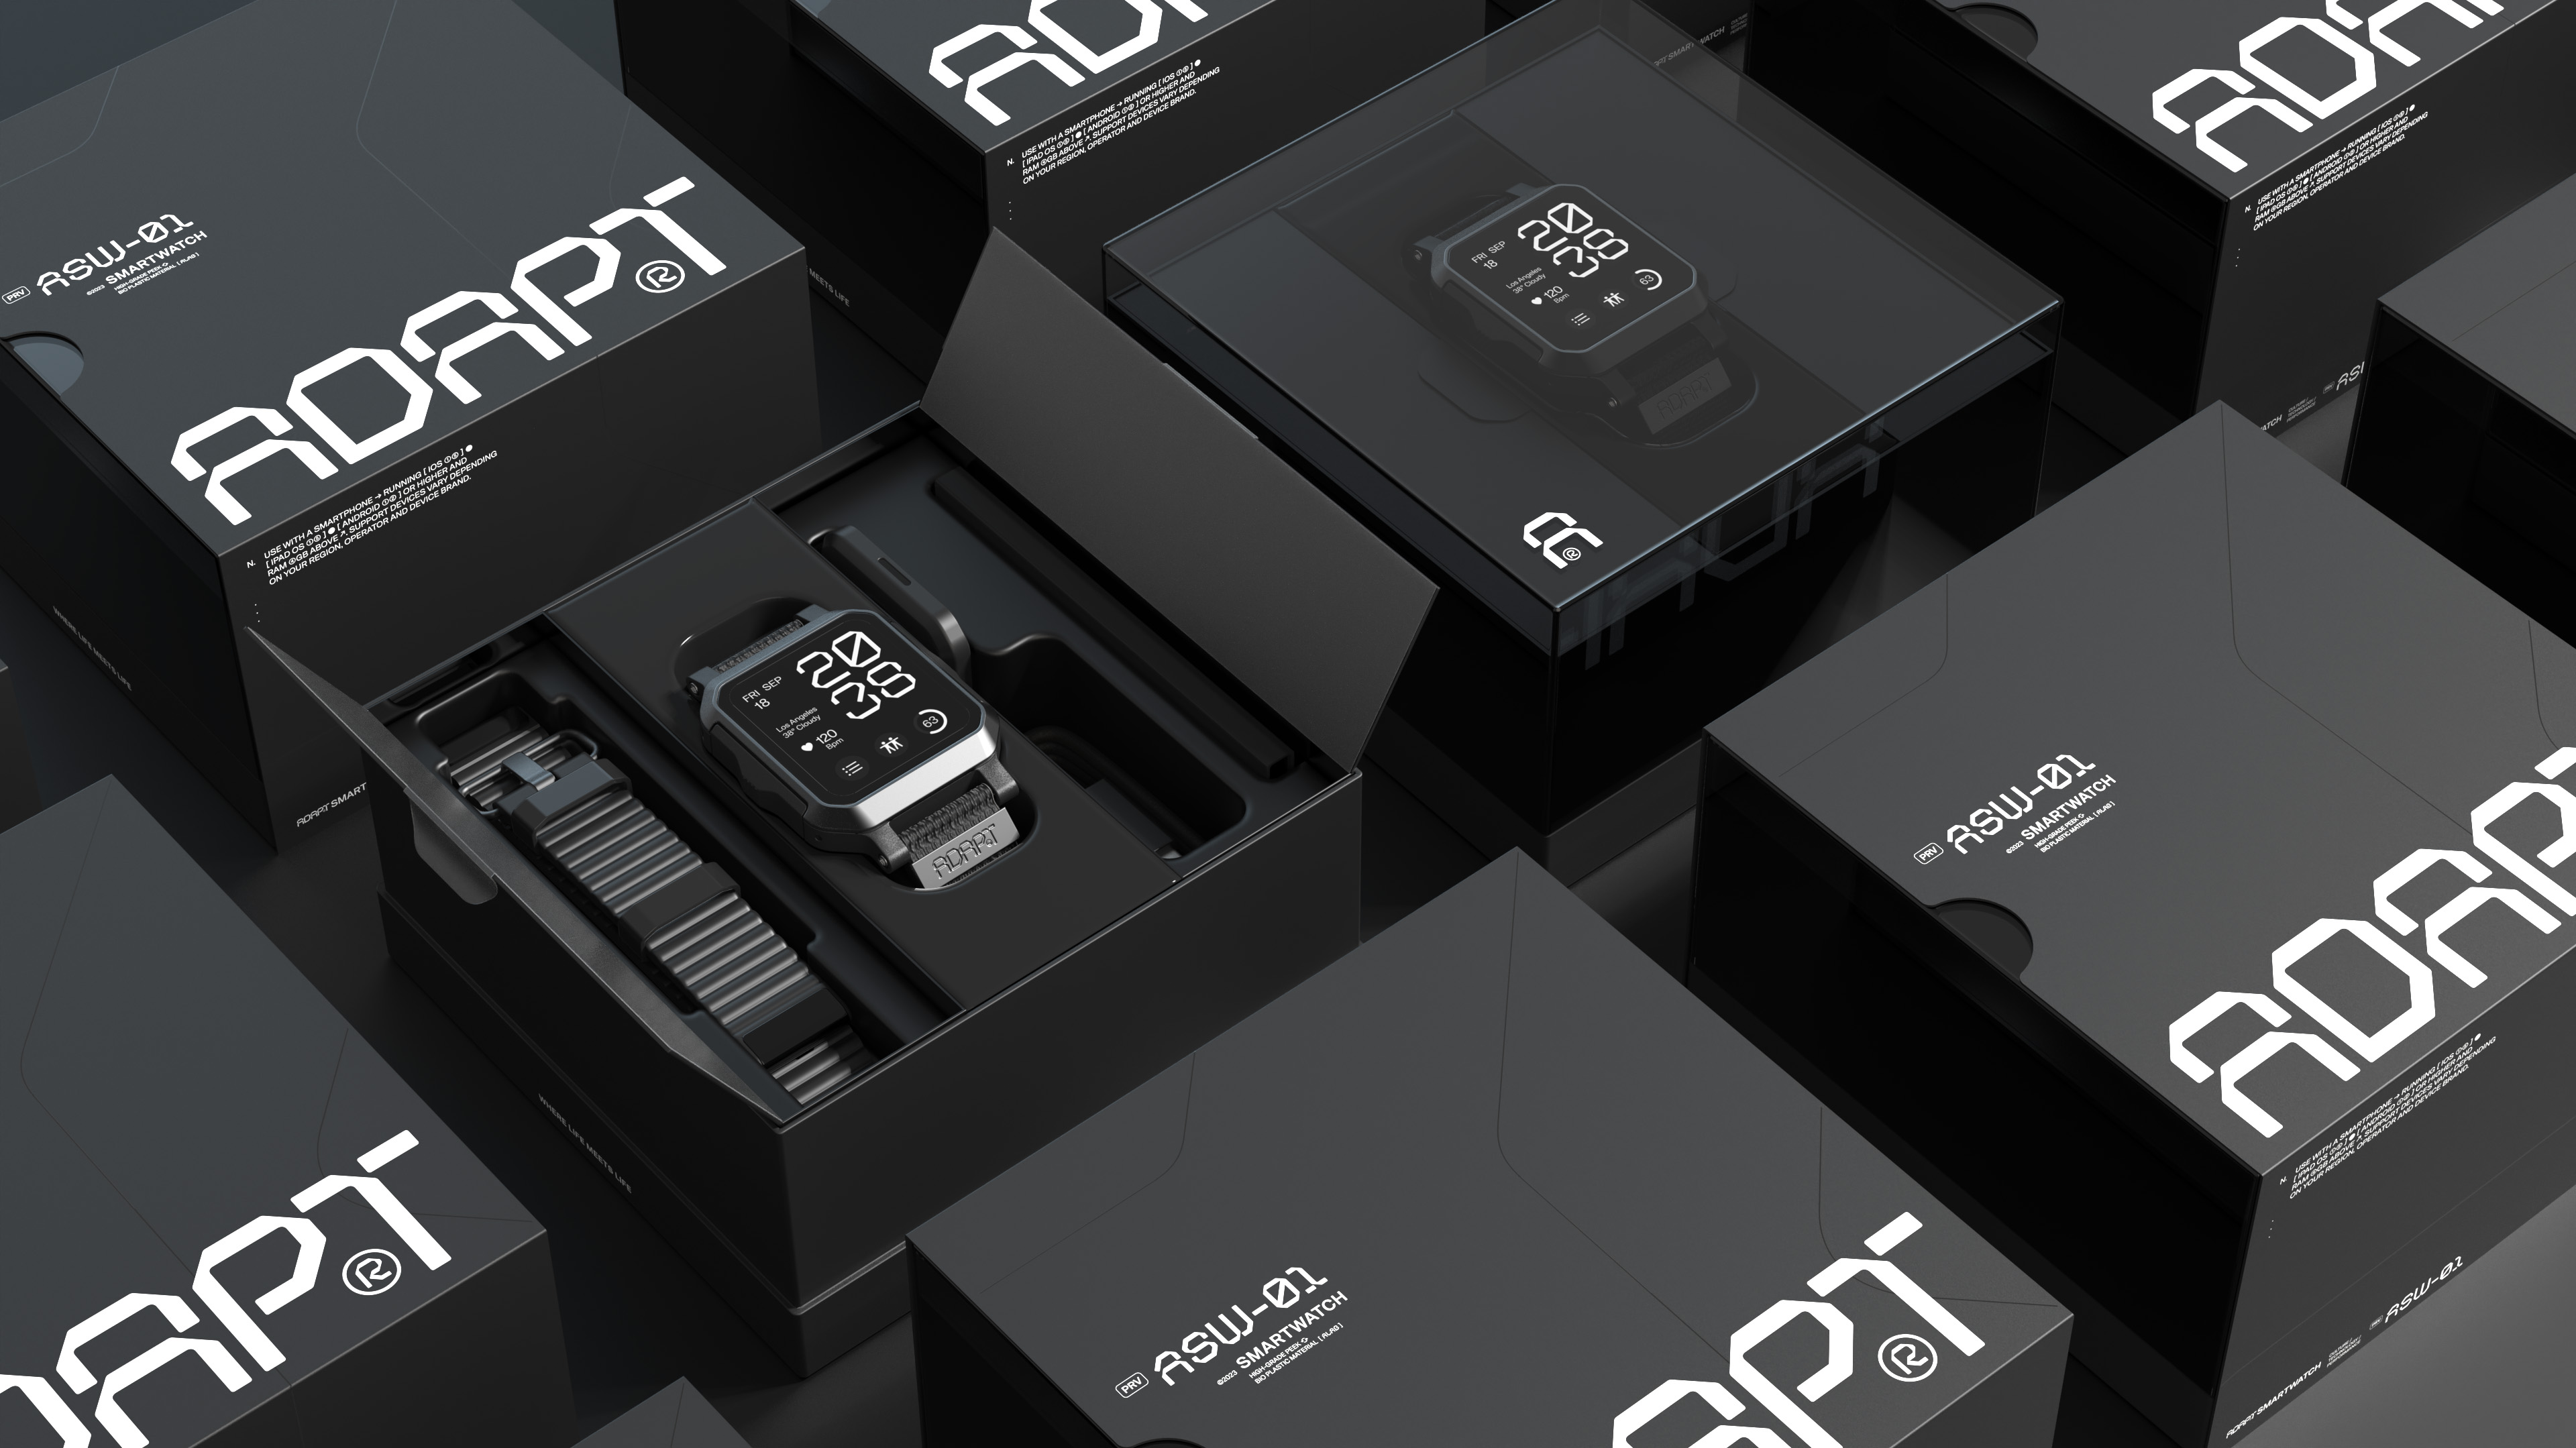 ADAPT Smartwatch Product Design and Visual Identity